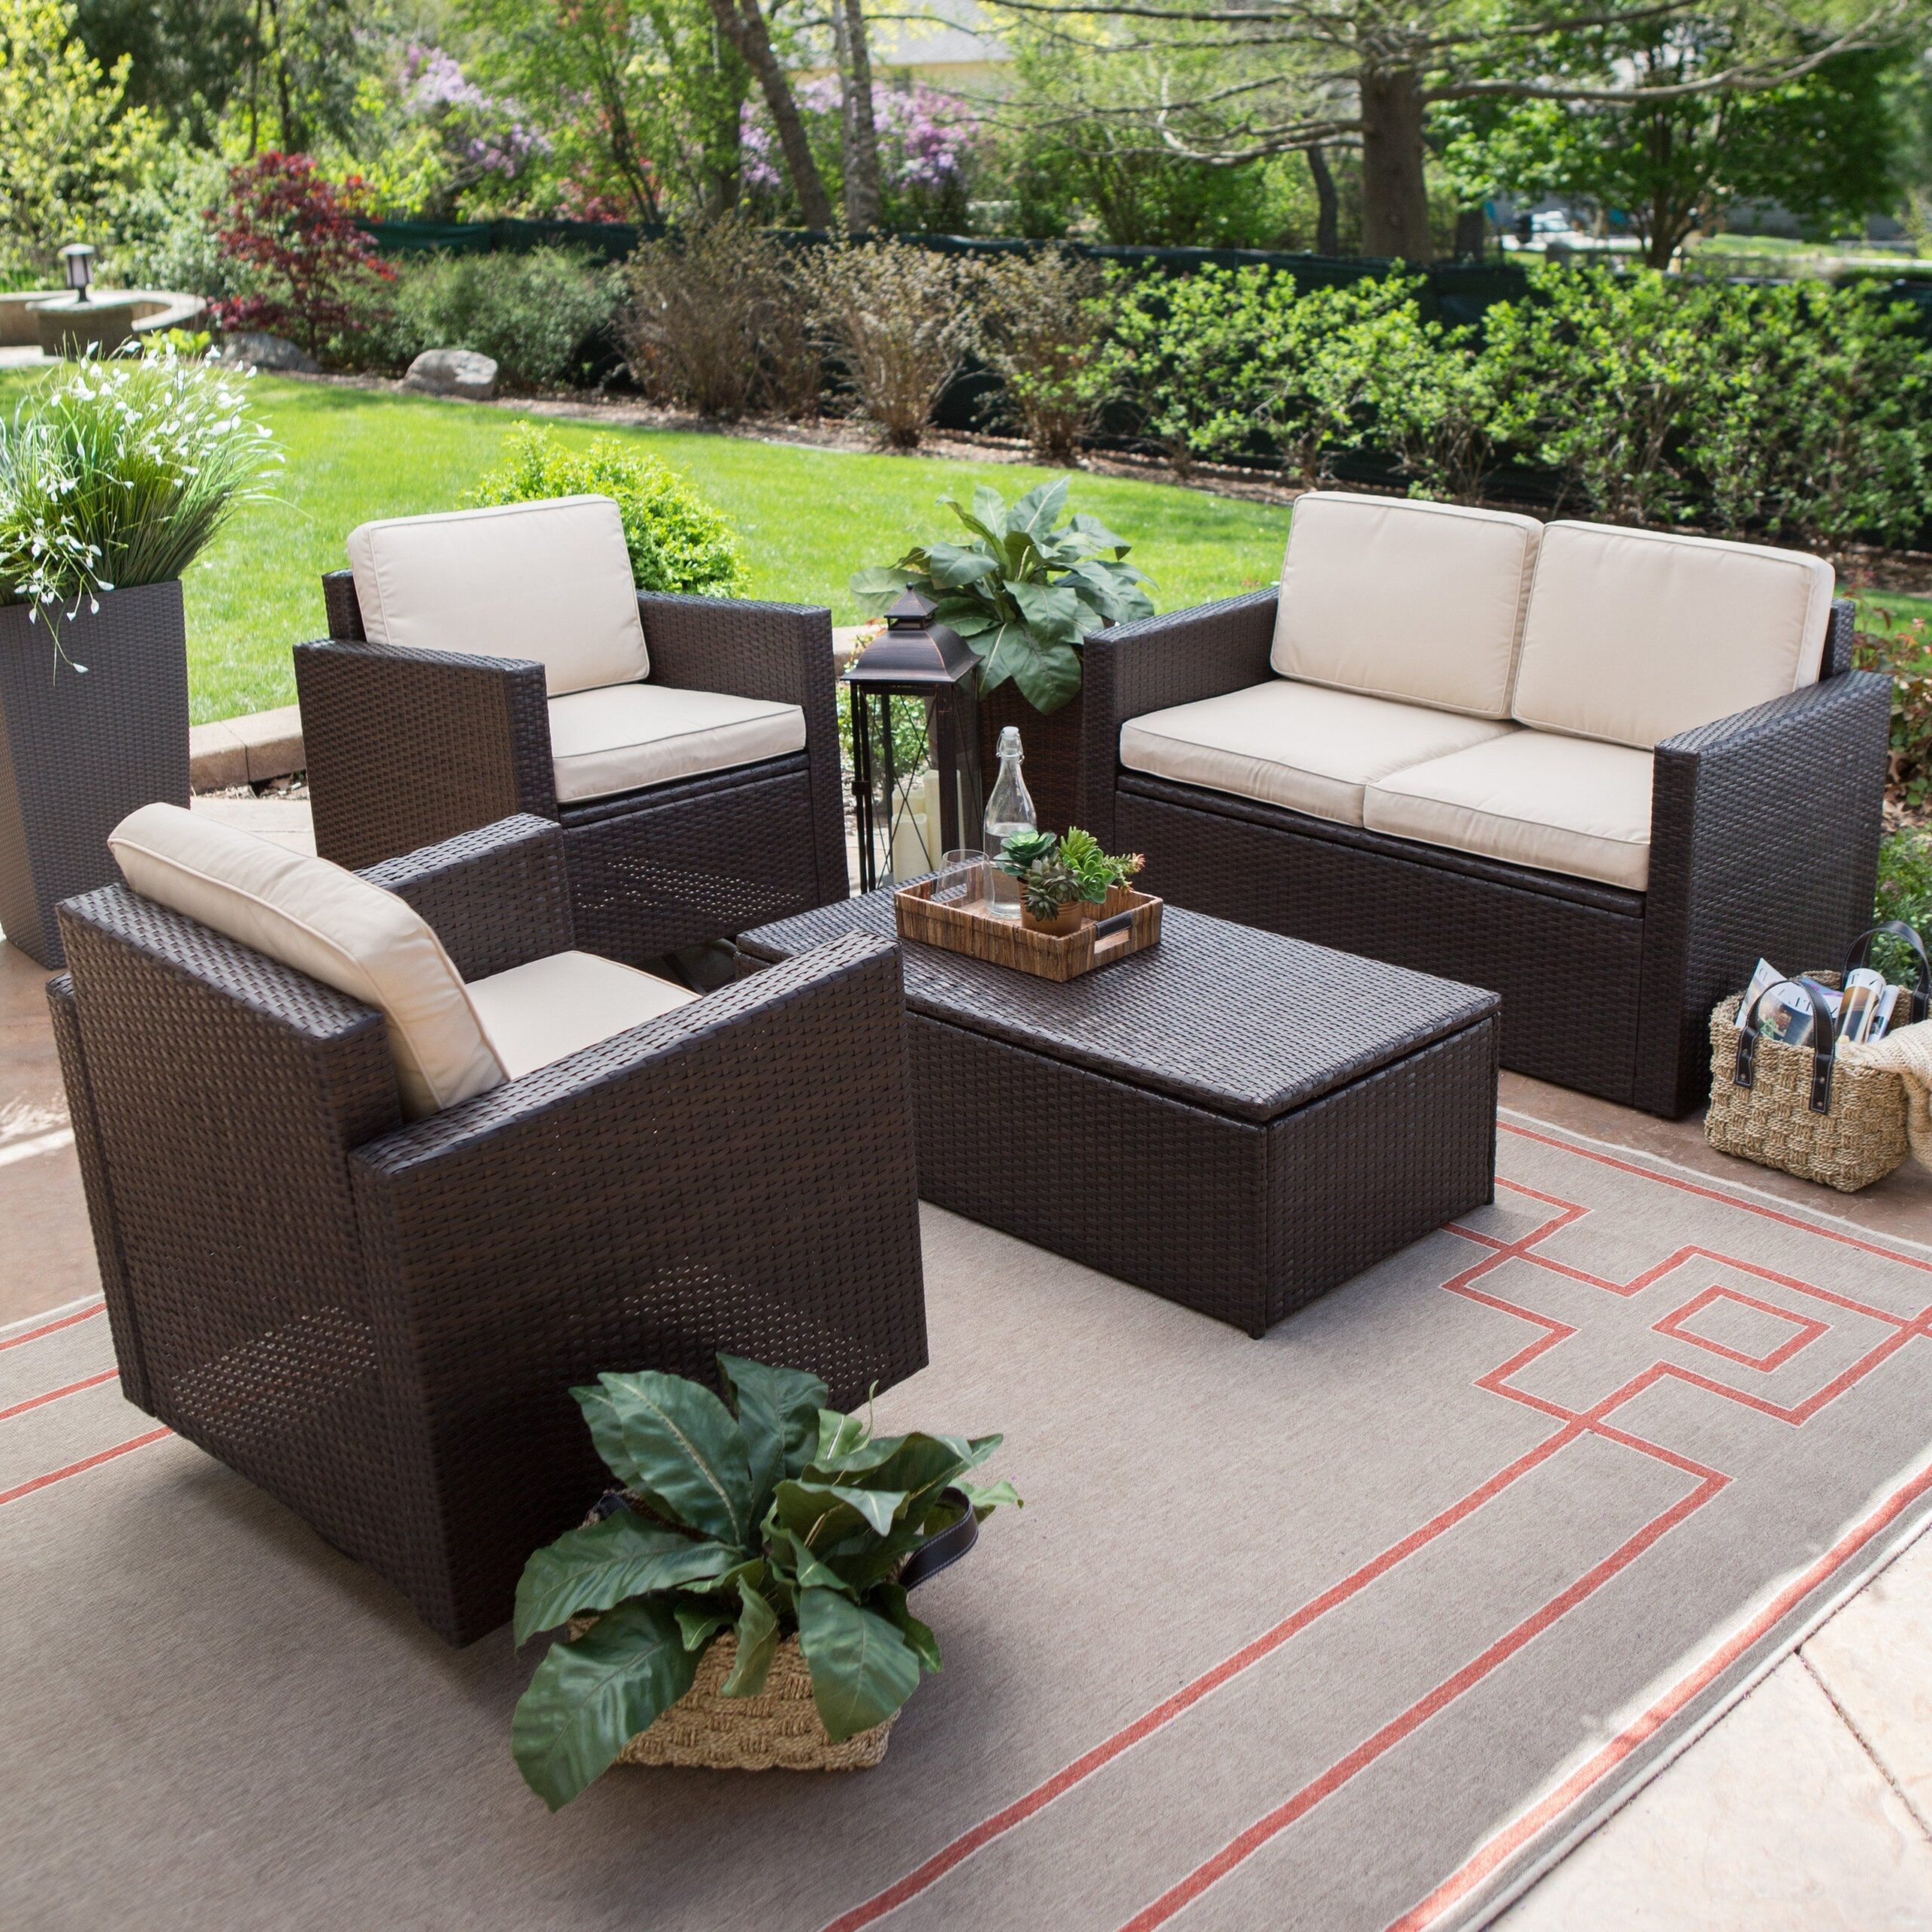 Outdoor Patio Conversation Sets With Swivel Chairs : Swivel Patio Set ...